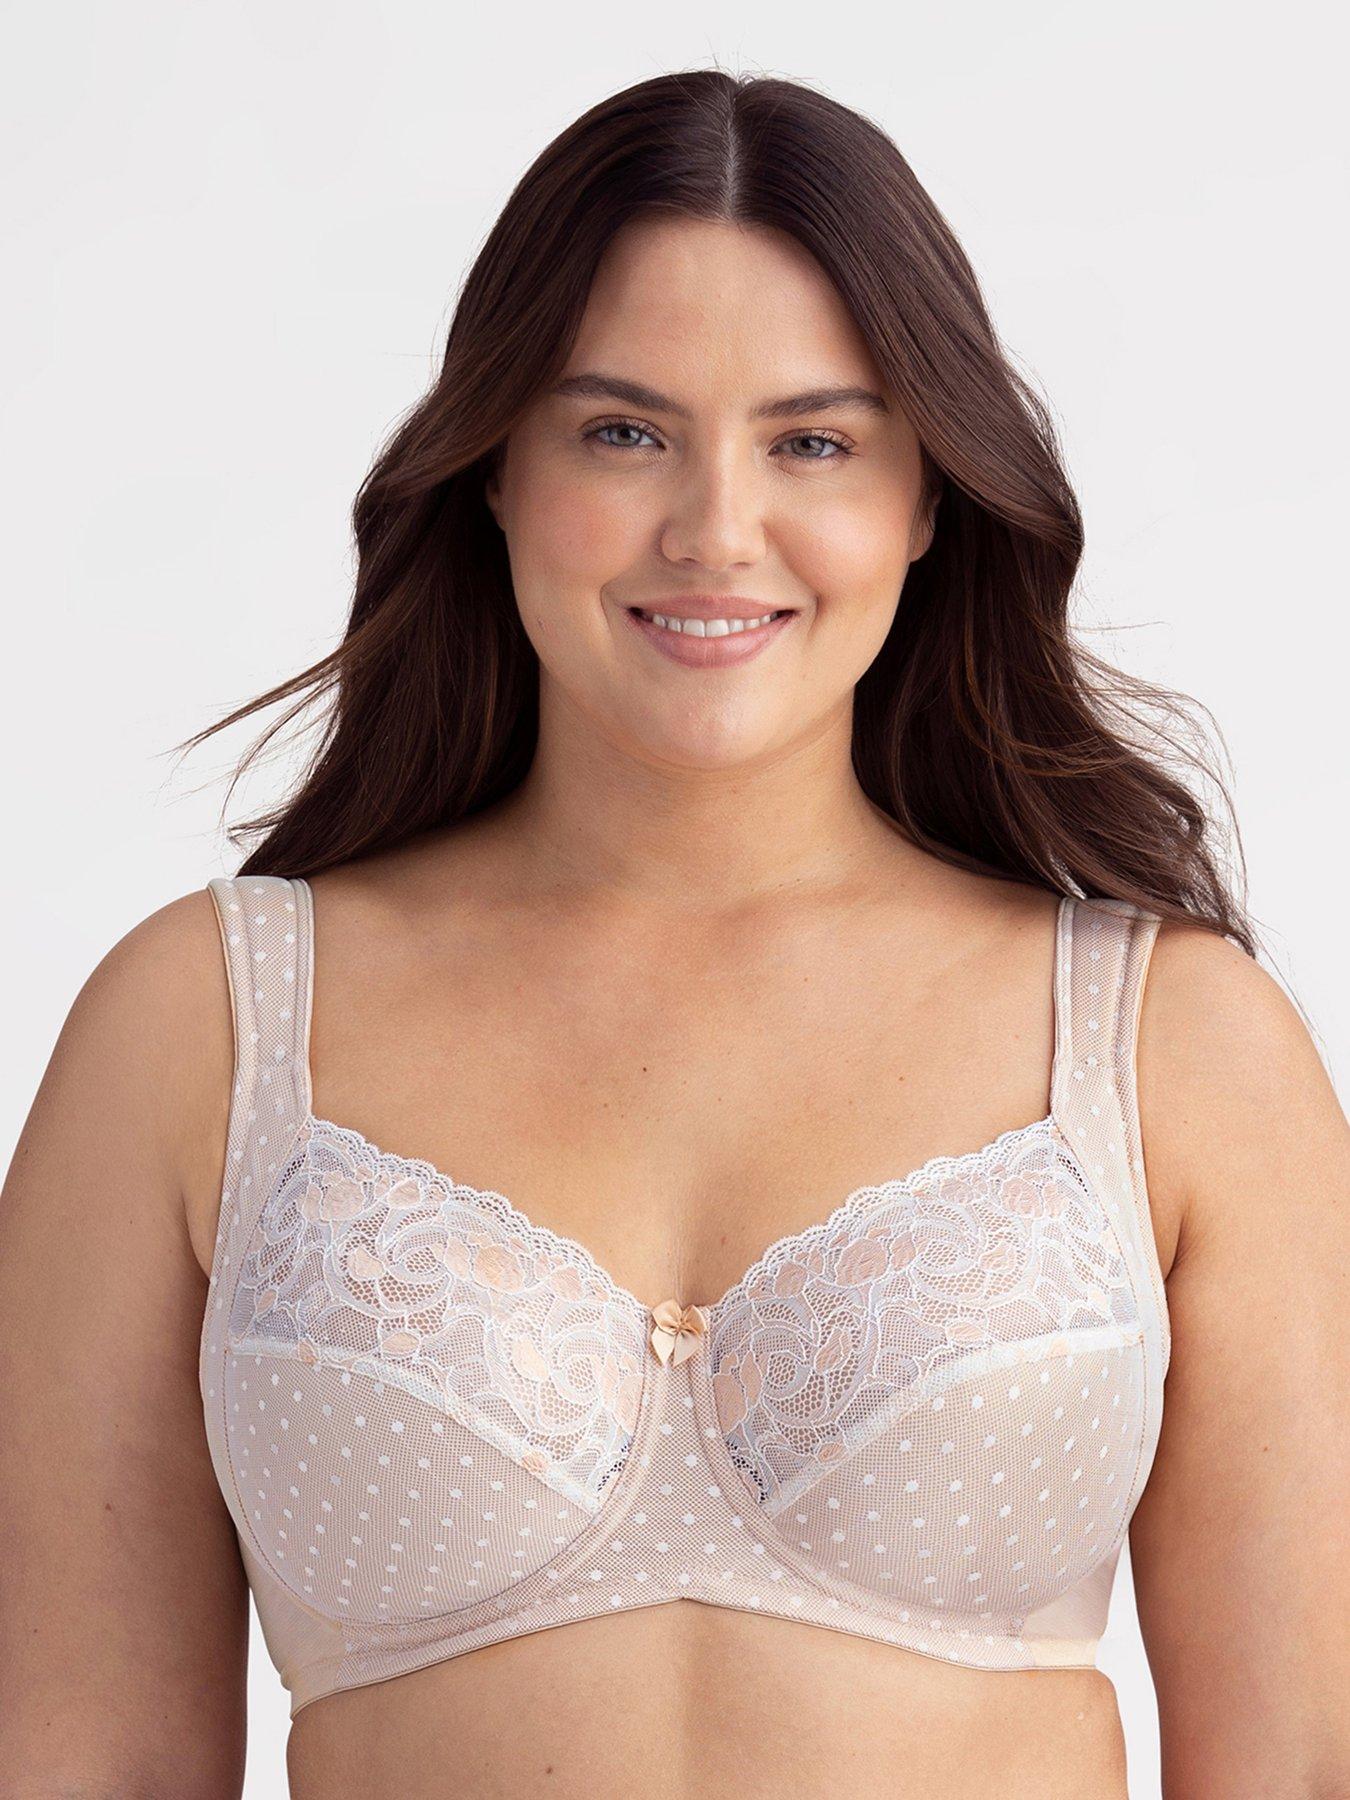 40e Support Bra - Get Best Price from Manufacturers & Suppliers in India